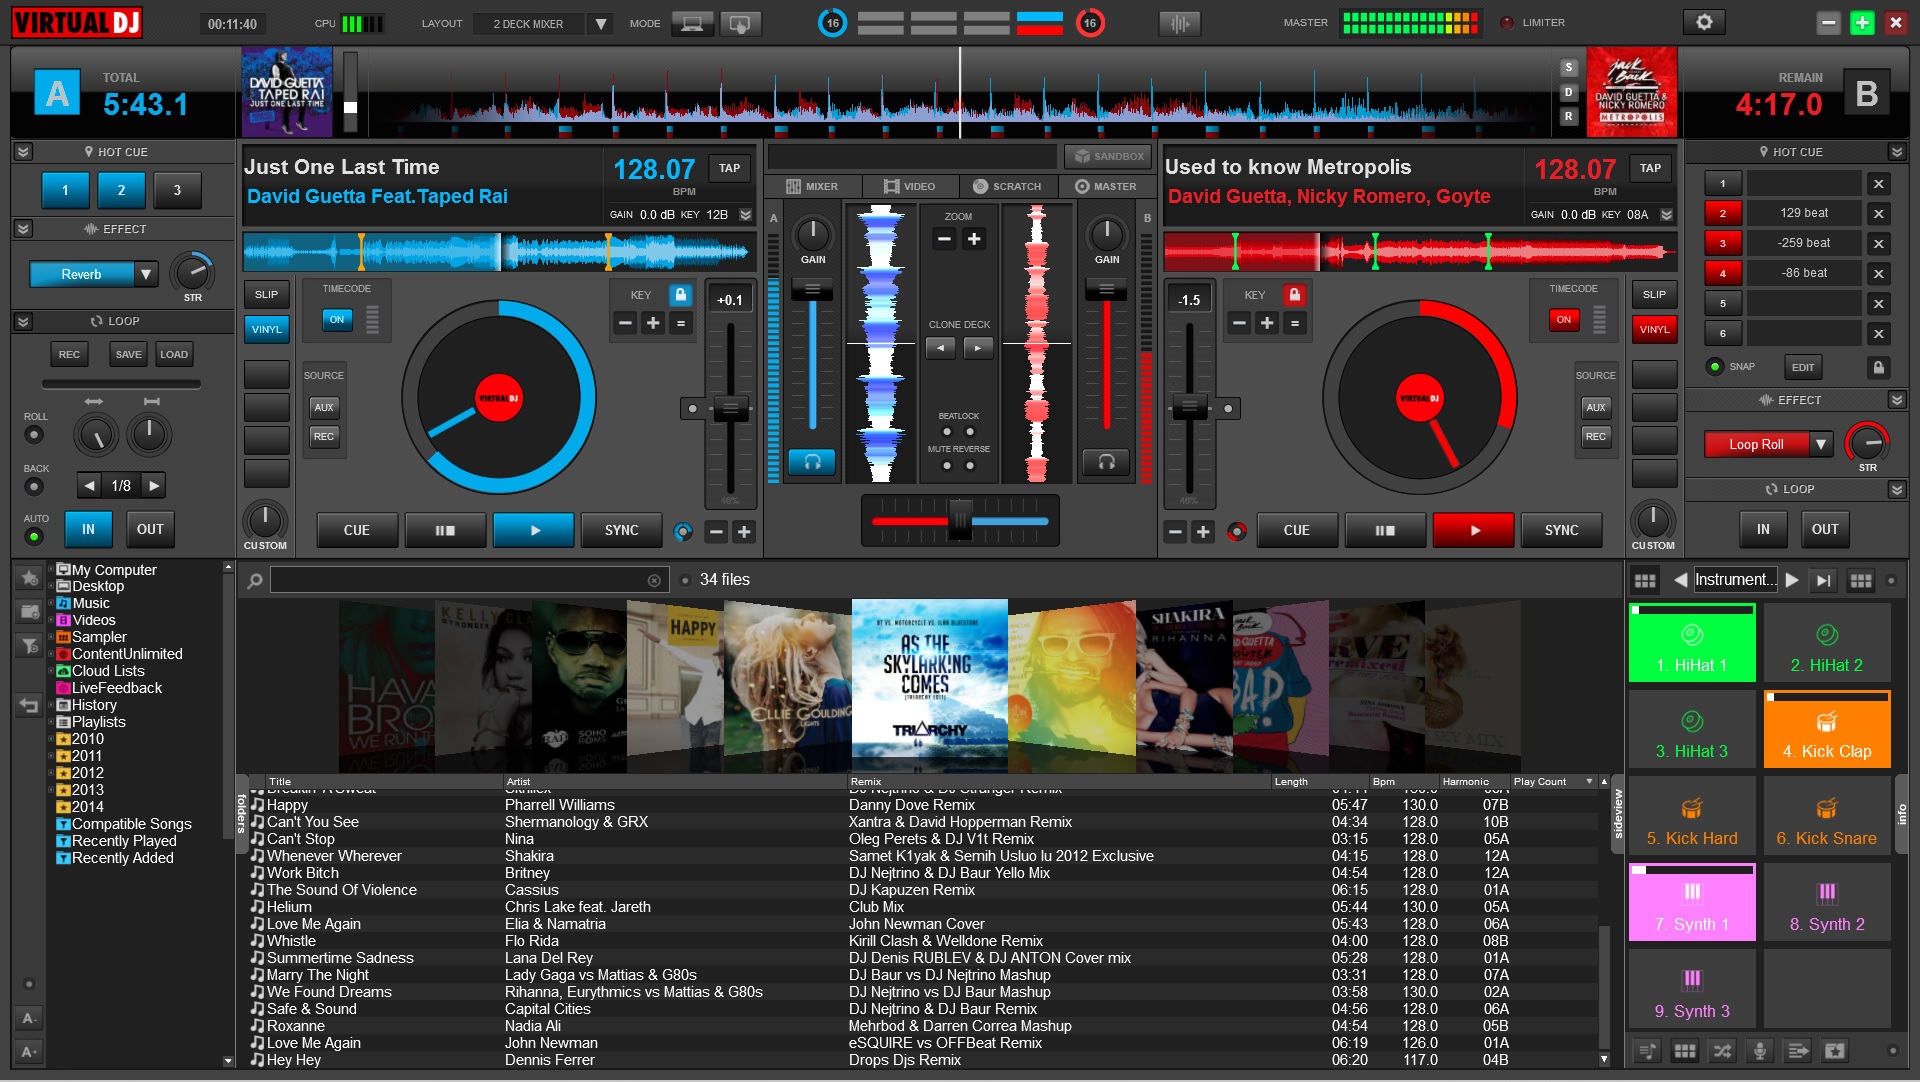 Virtual DJ Download - professional tool for video audio mixing and arranging